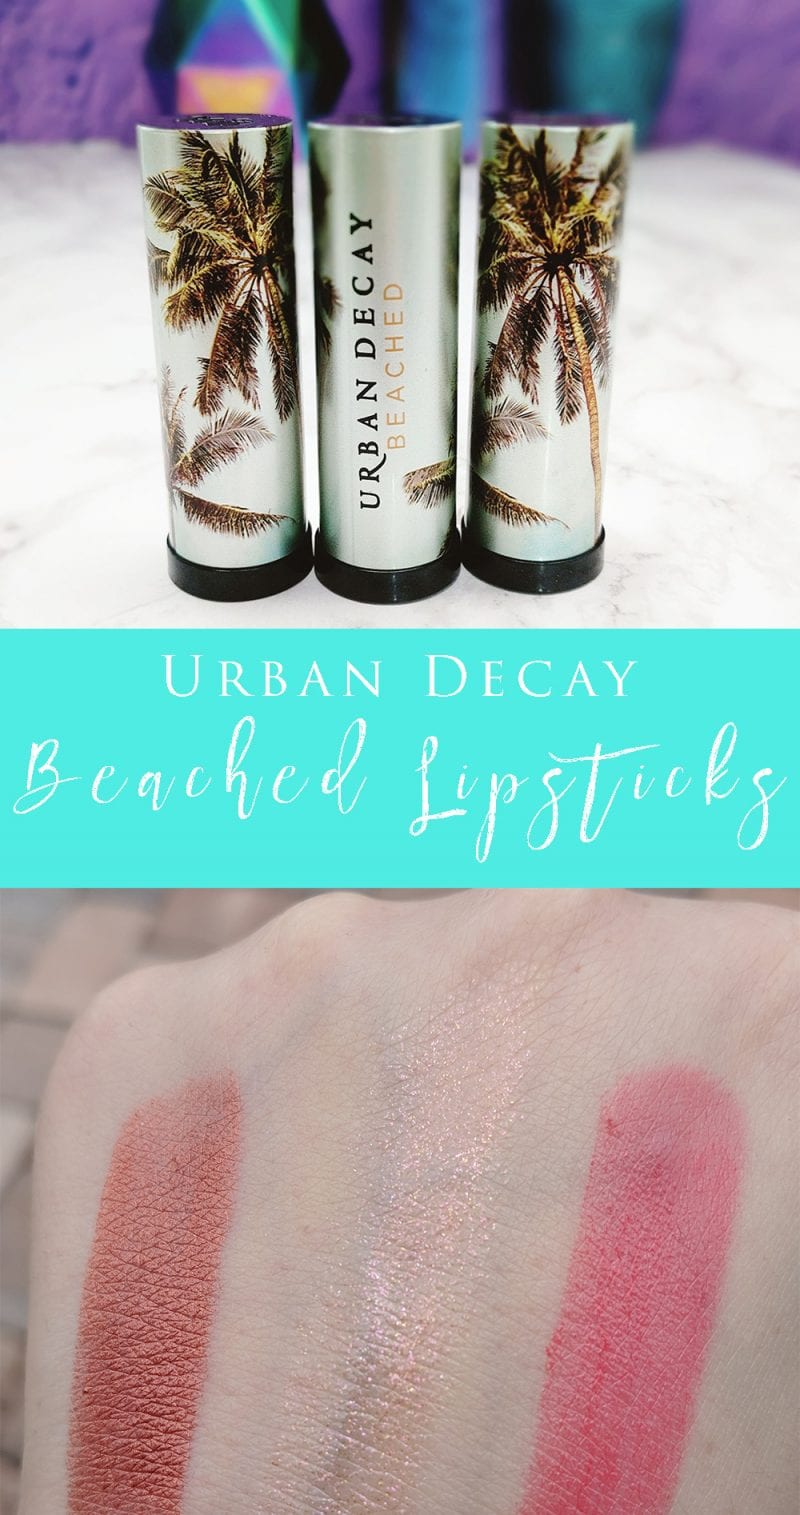 Urban Decay Beached Vice Lipsticks Review and Swatches #urbandecay